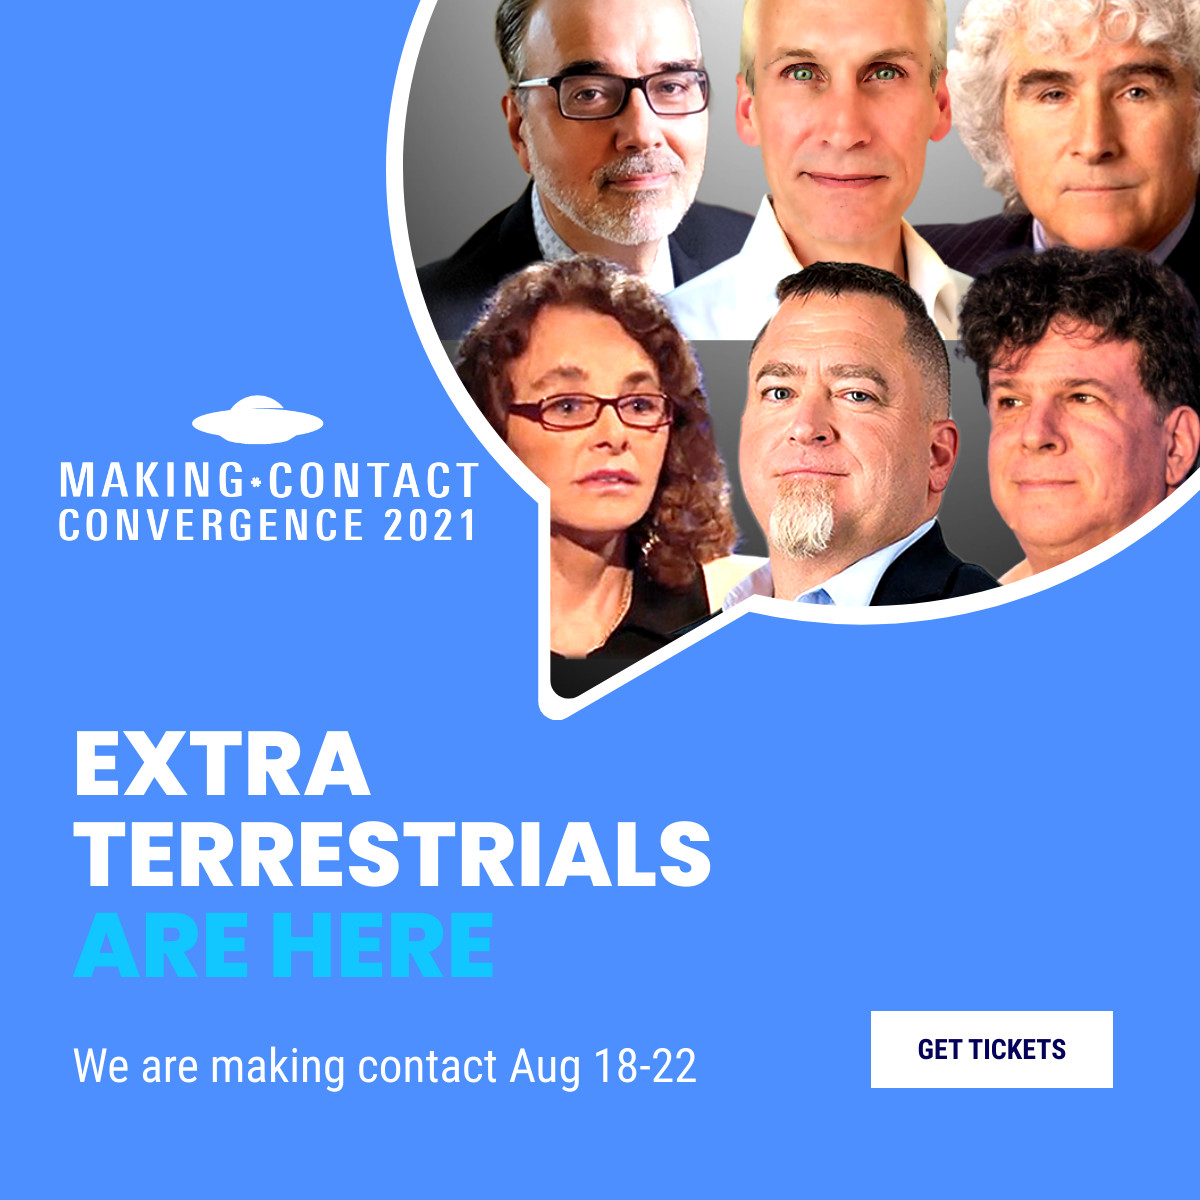 Making Contact Convergence 2021